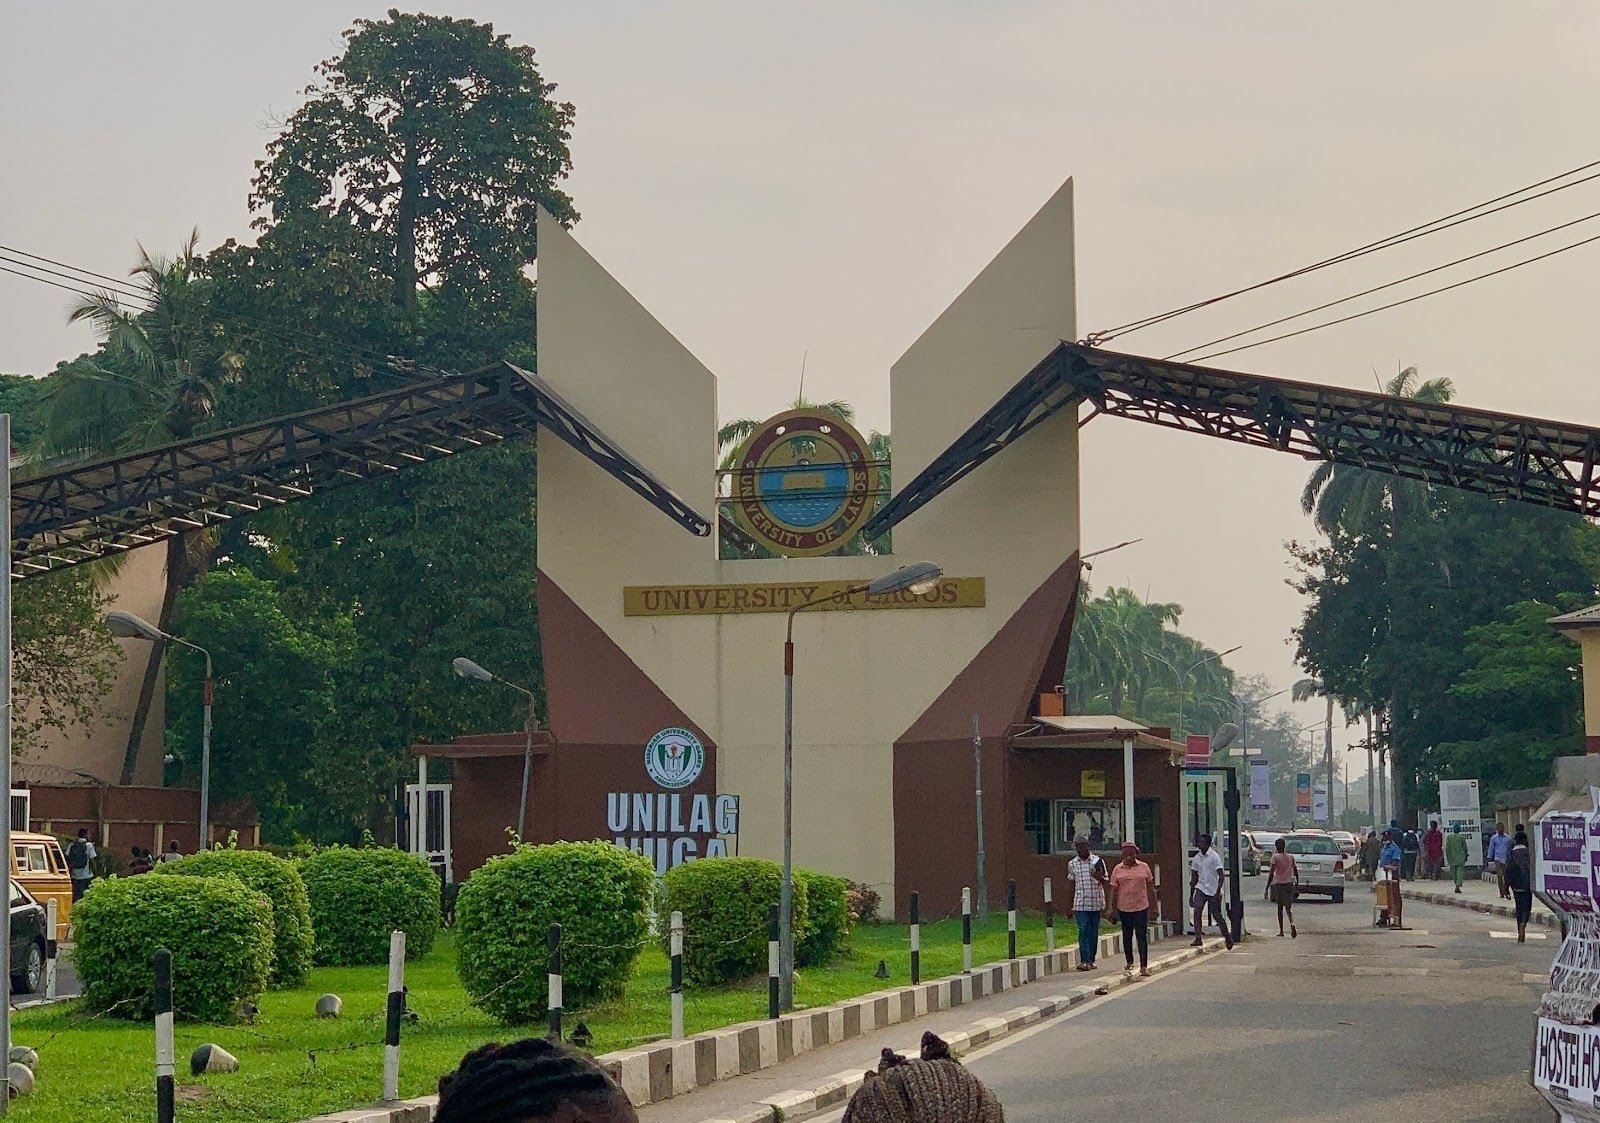 <span class="translation_missing" title="translation missing: en.meta.location_title, location_name: University of Lagos, city: Lagos">Location Title</span>